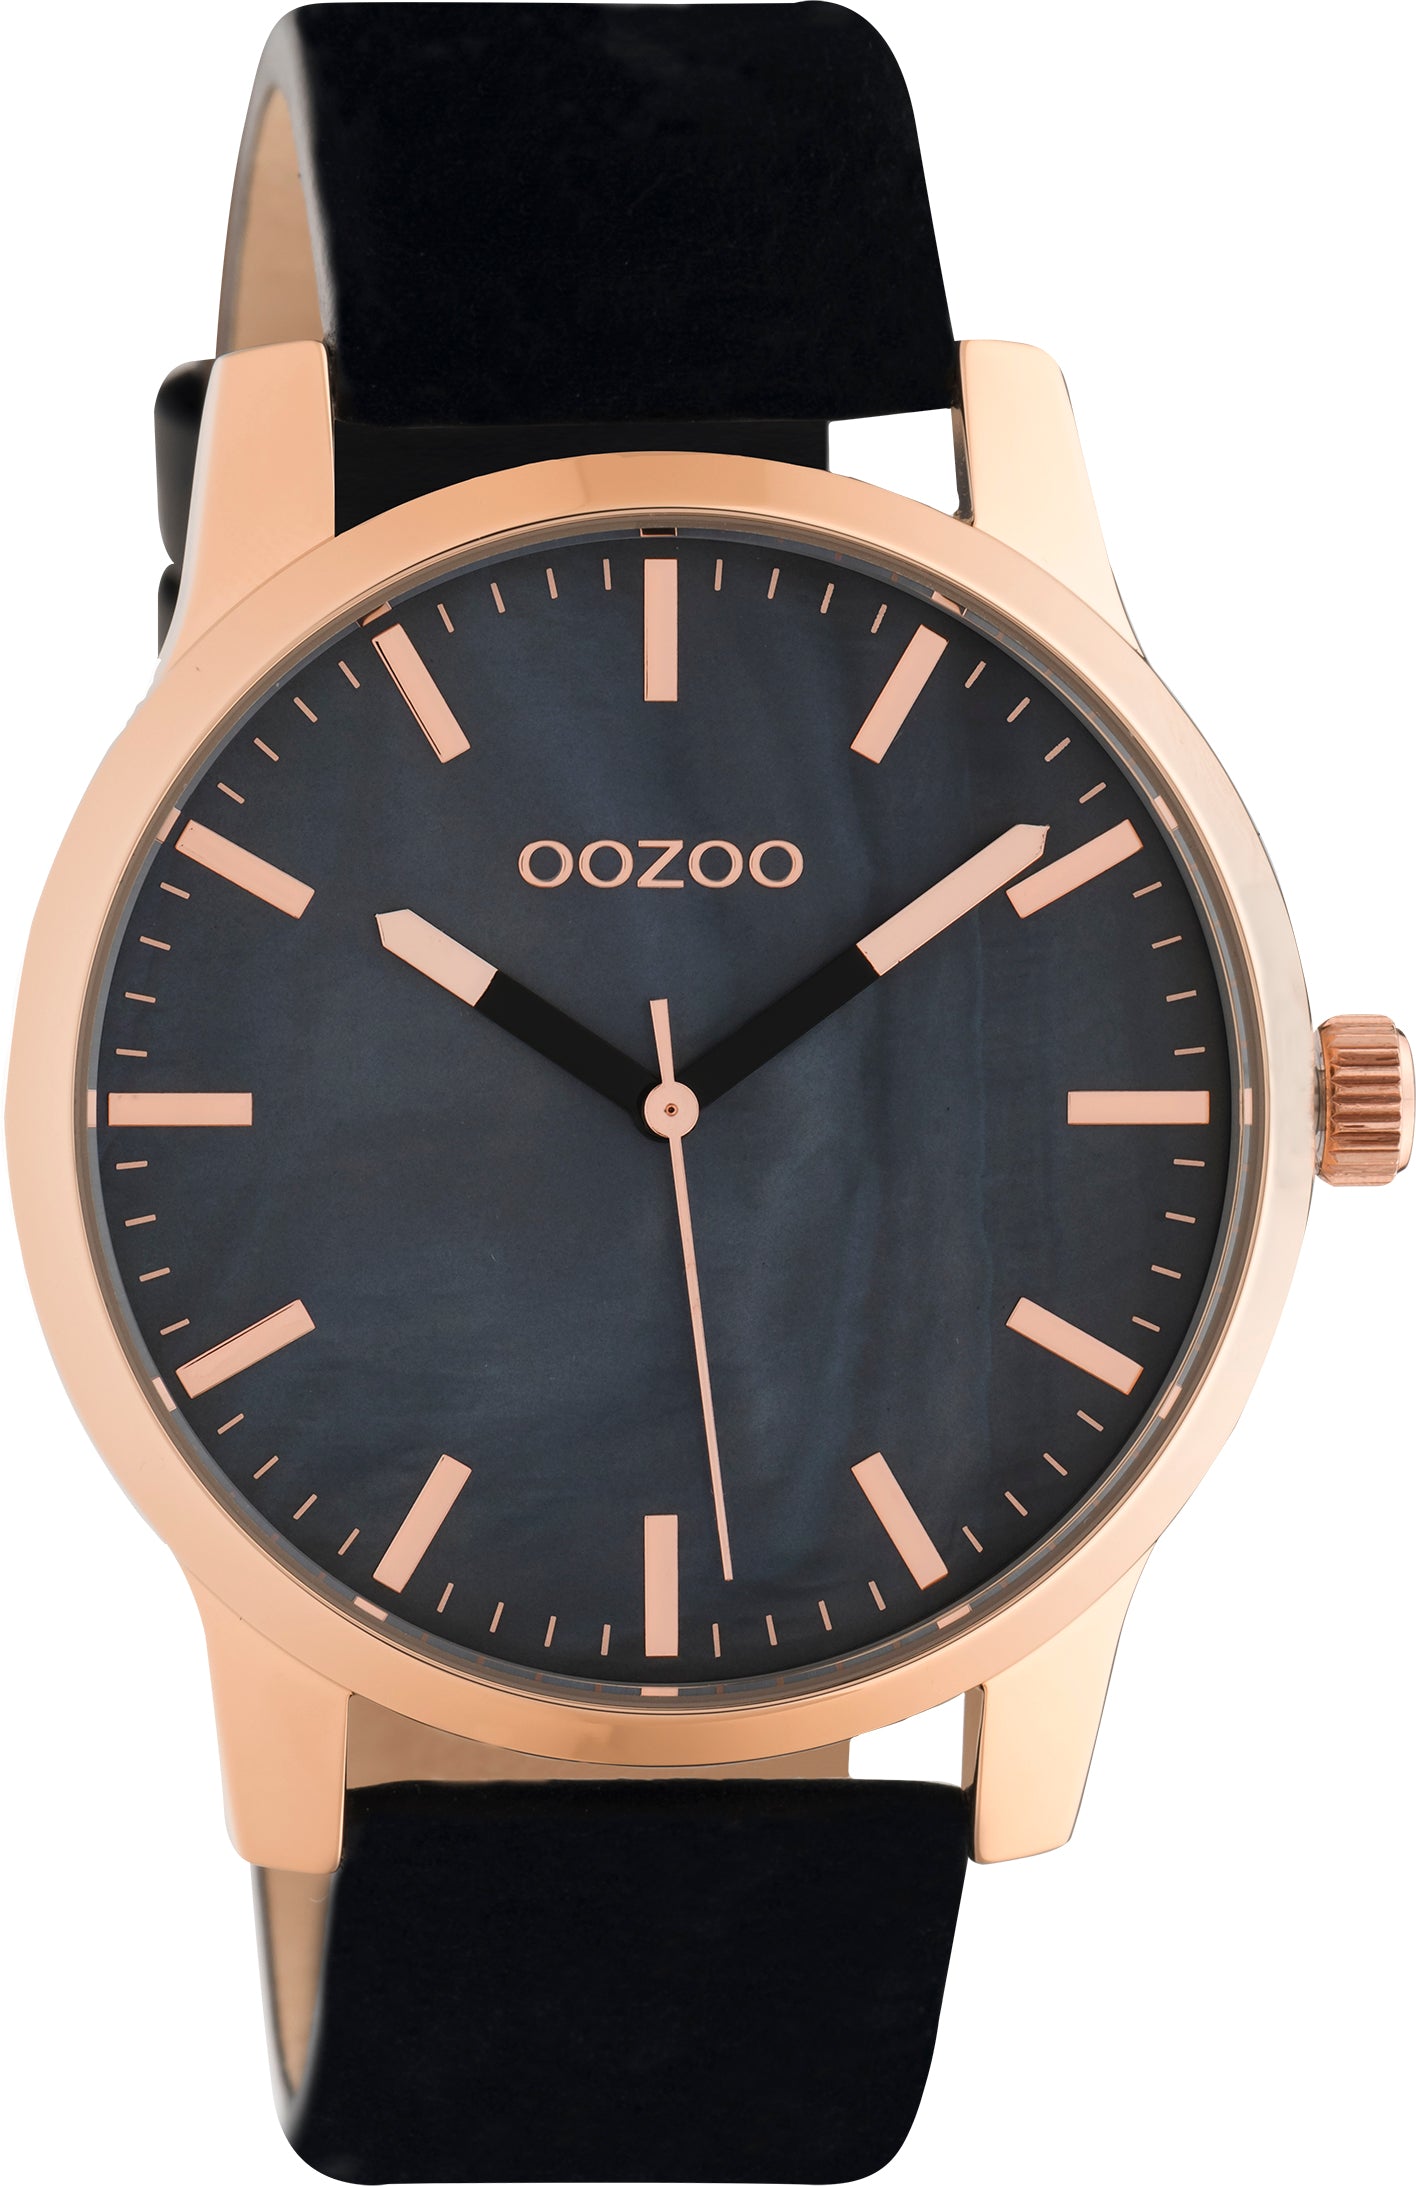 OOZOO 42mm Rose Gold Black Leather Watch